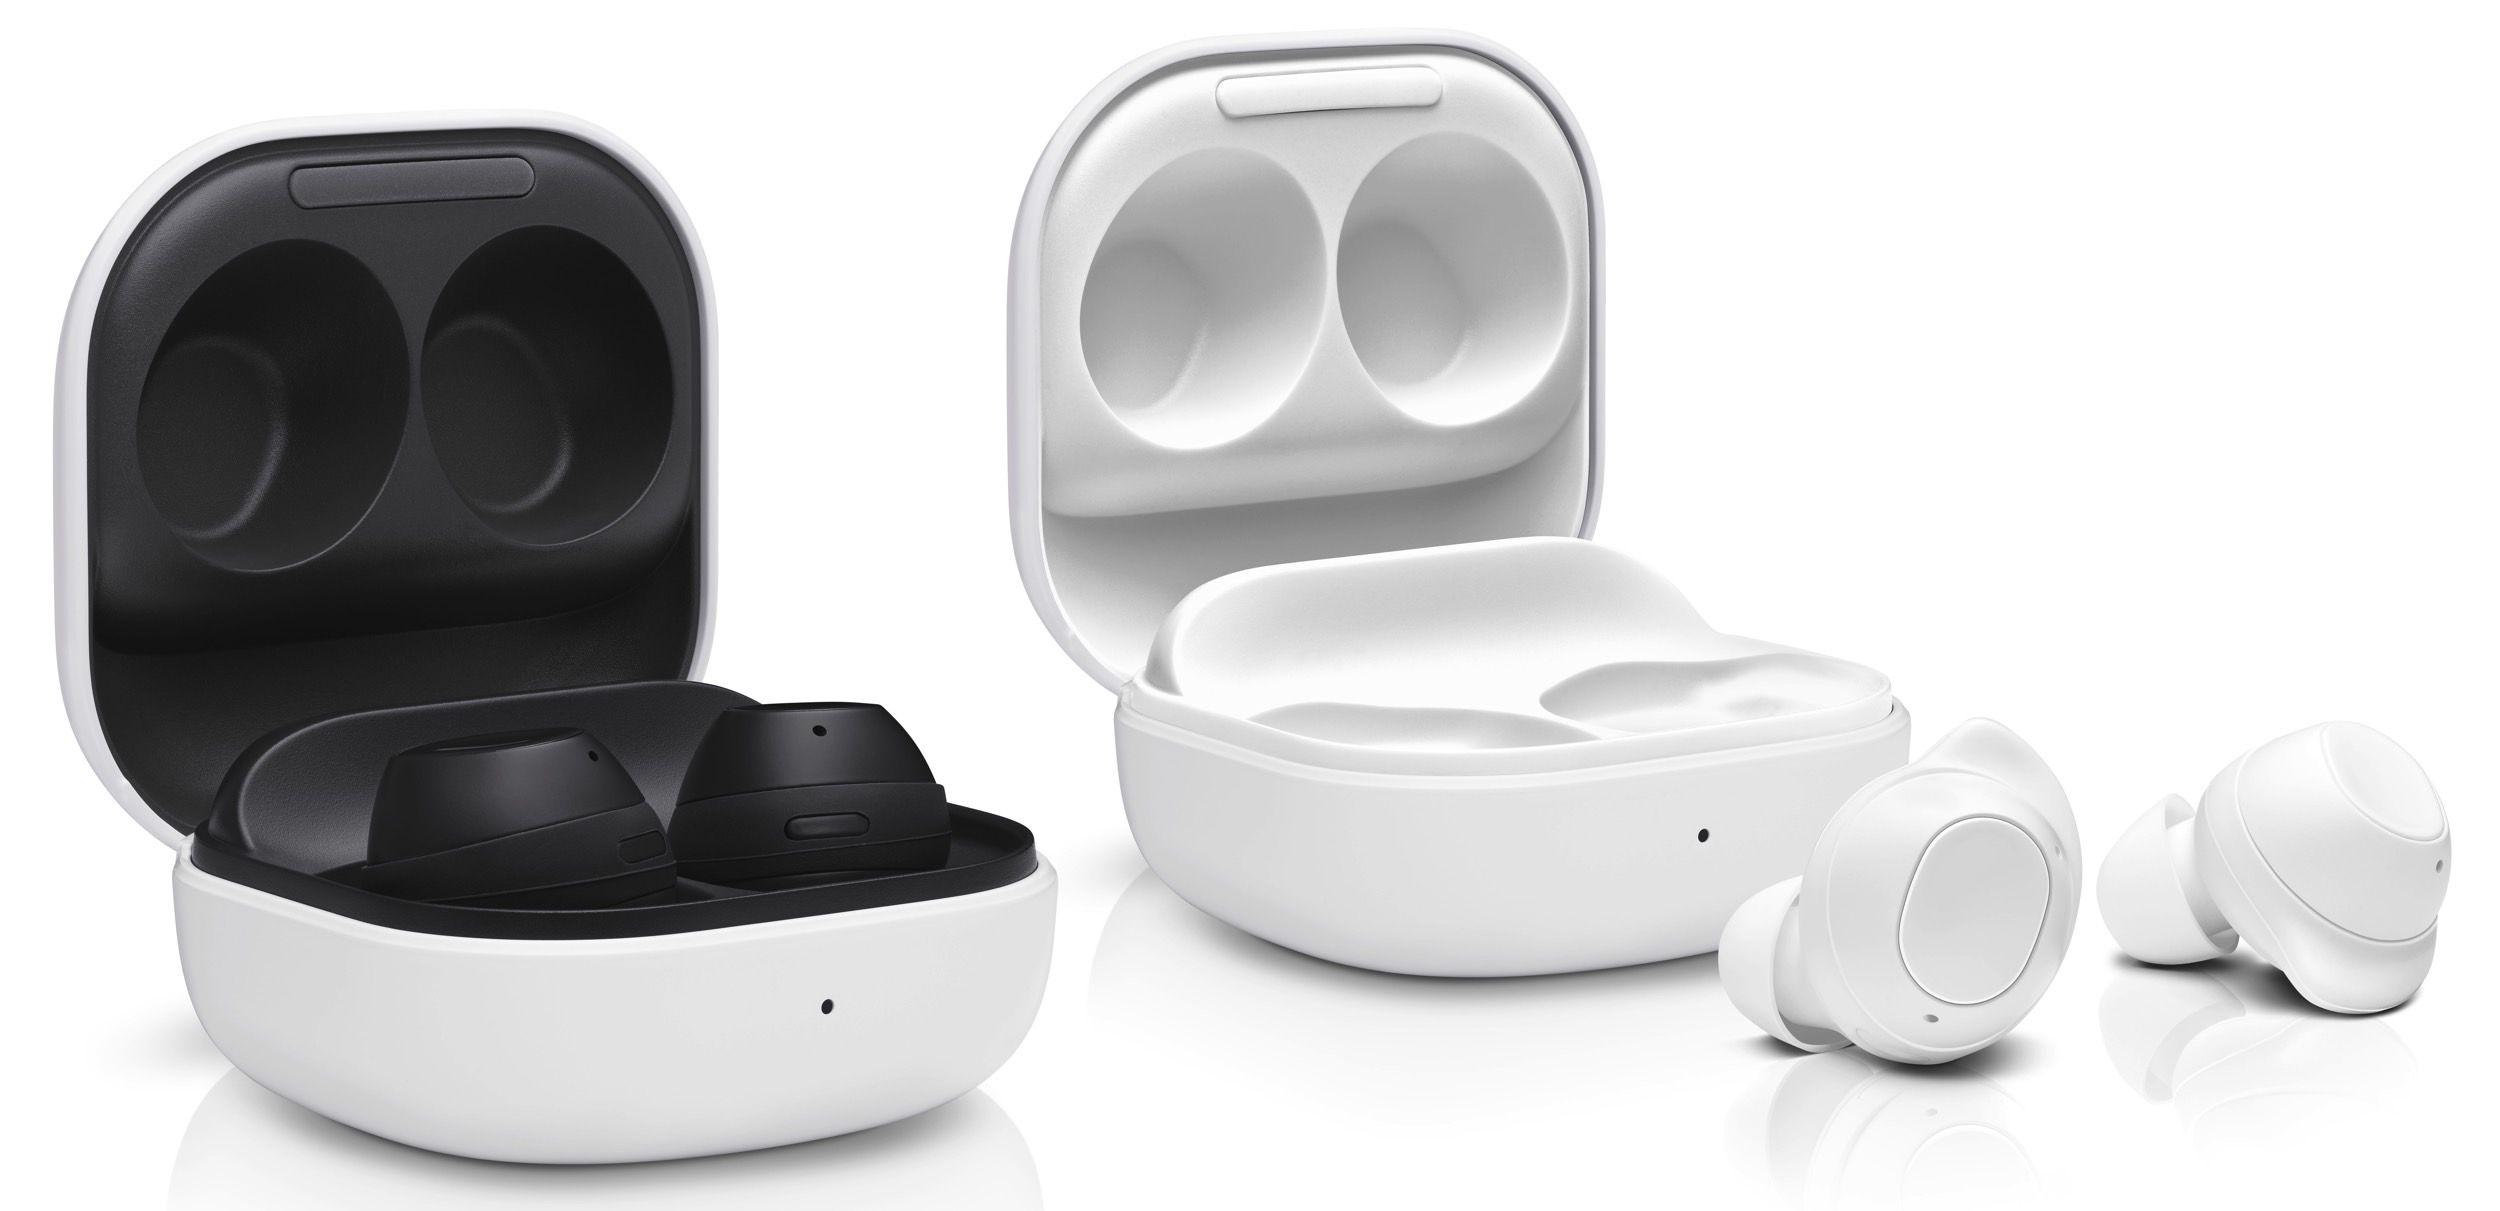 Samsung's new Galaxy Buds are surprisingly affordable